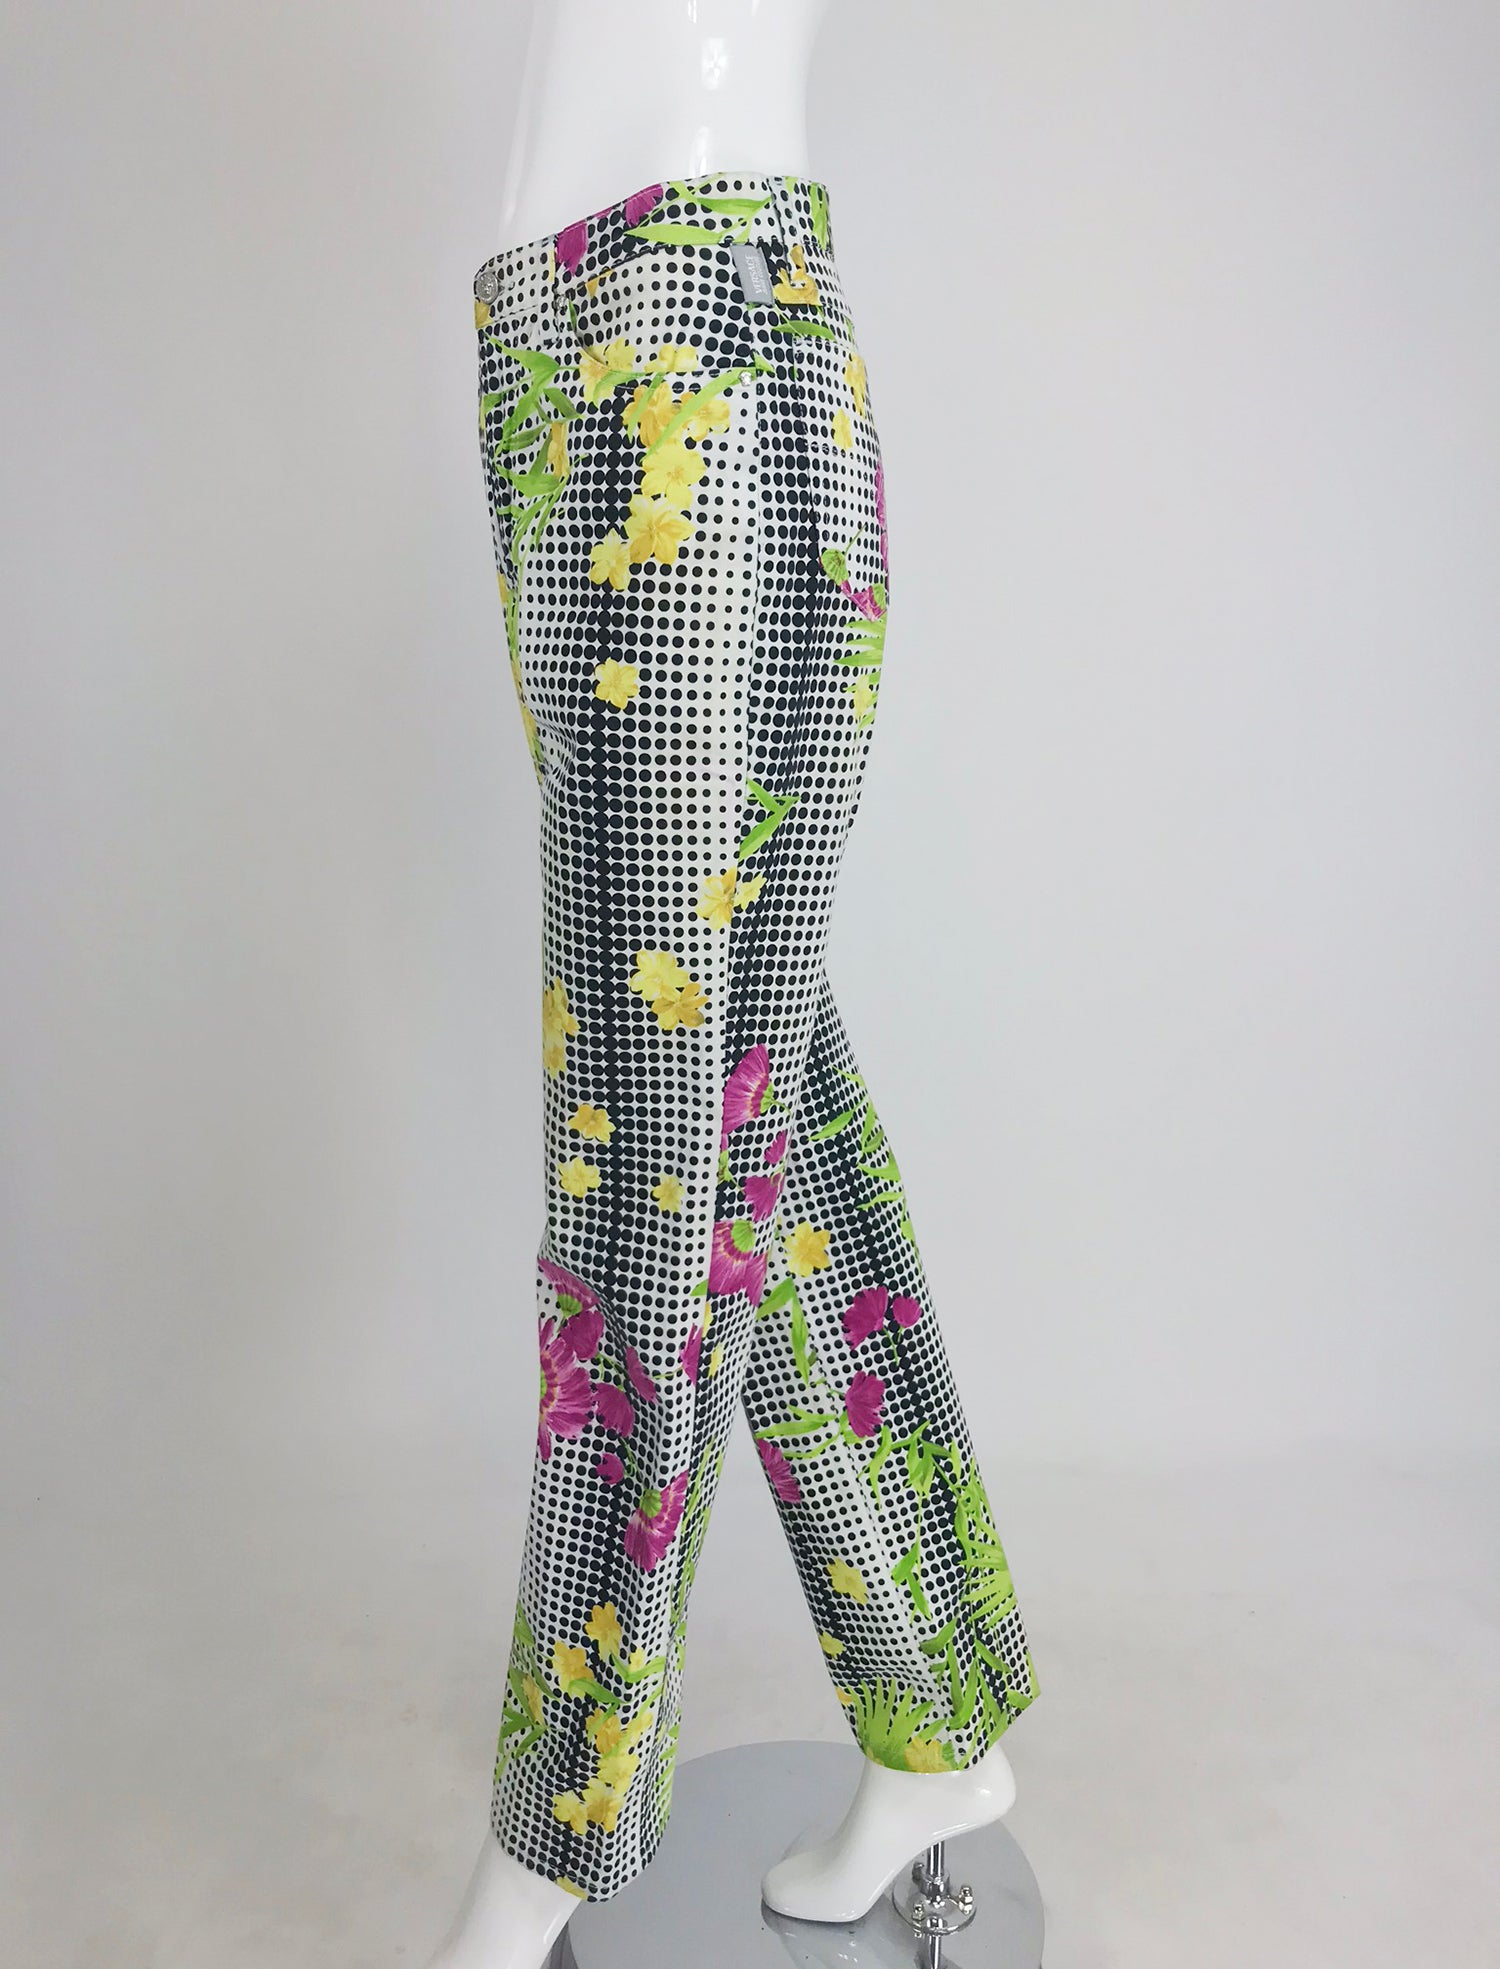 Versace Jeans Couture 1990's Floral Print